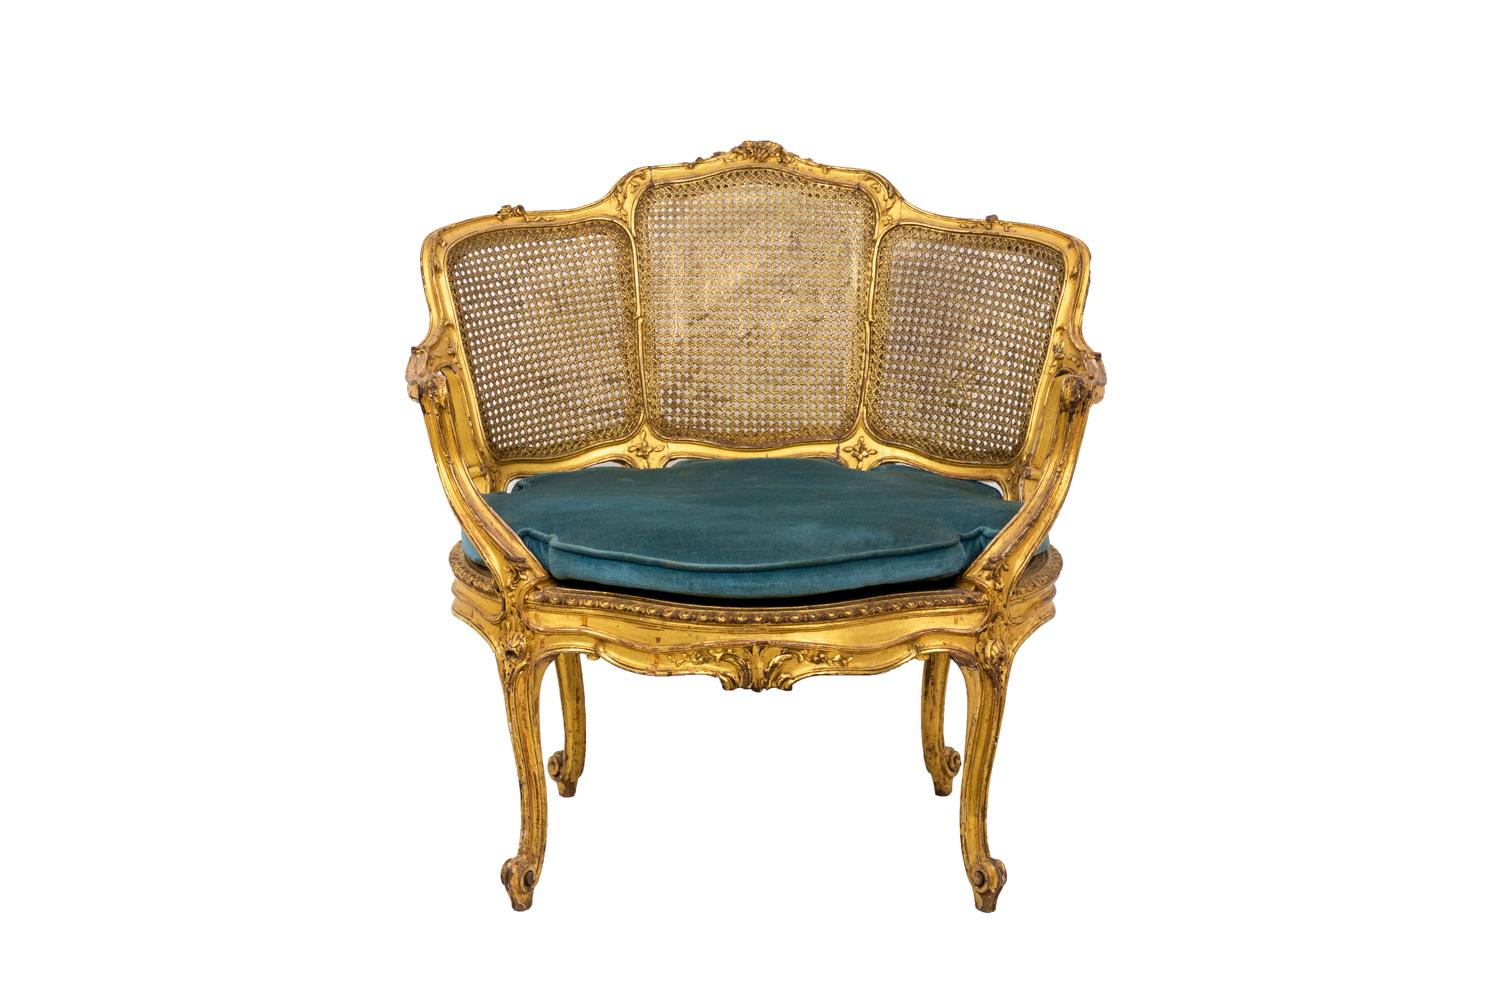 Little Louis XV style marquise armchair standing on four cabriole legs finished by scrolls. Shell decorated apron. Caned back in three sections decorated with flowers and shell. Arm support on the leg line adorned with acanthus leaves. Wide seat